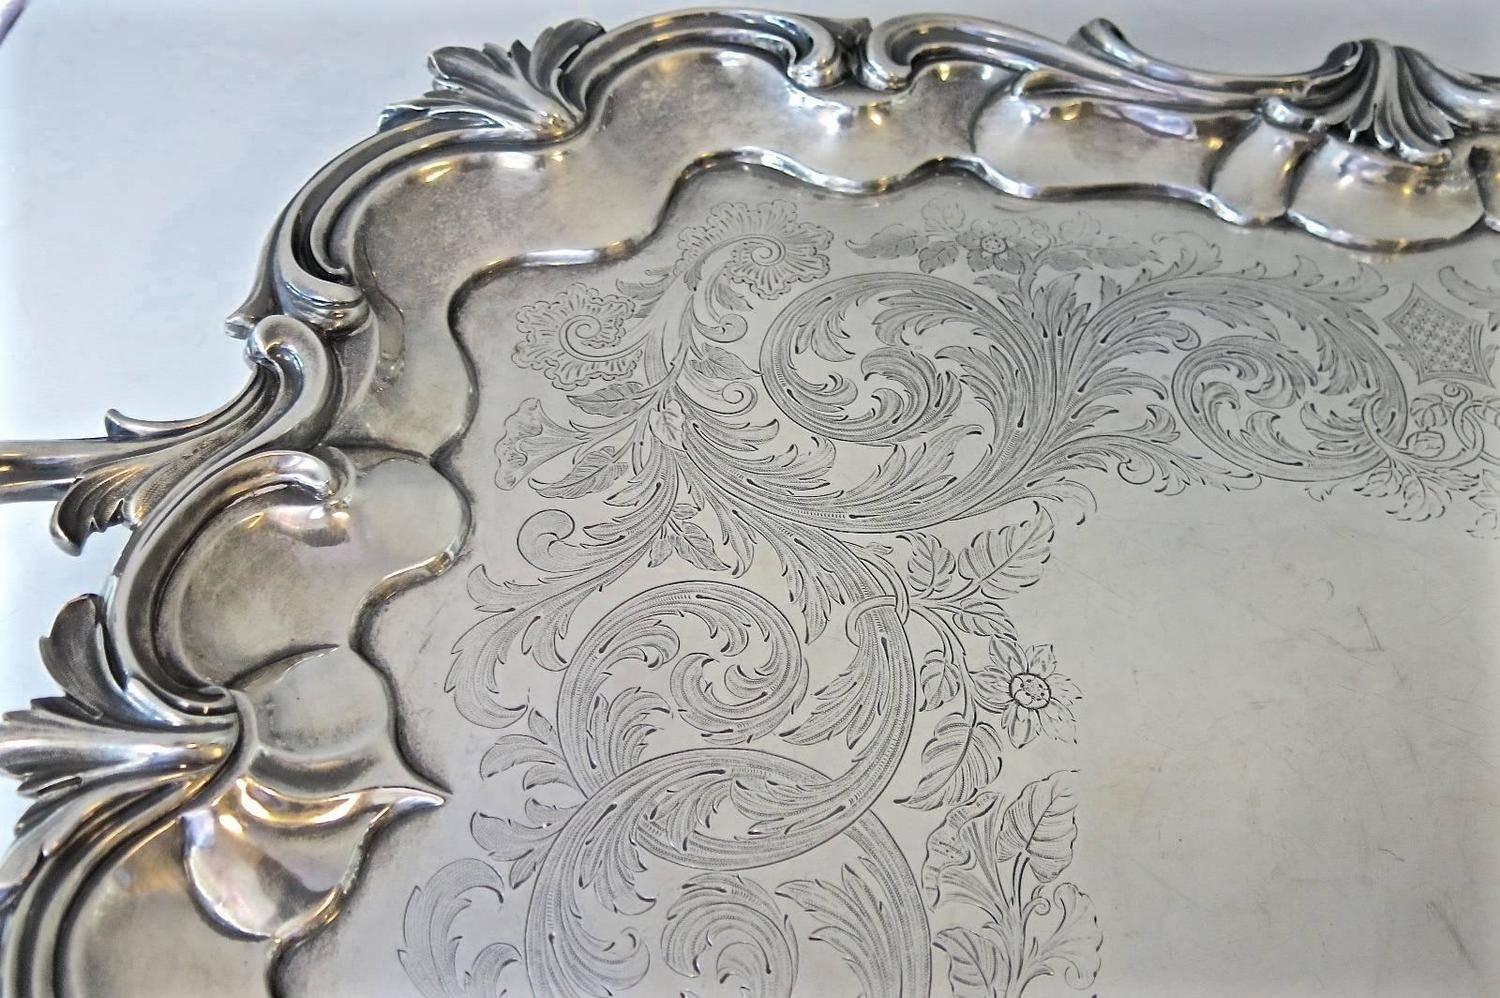 Superb quality, two-handled, antique Victorian sterling silver hallmarked tray. Beautiful hand engraved decoration, applied border, cast handles and standing on four cast shell feet. Measures: 30.25